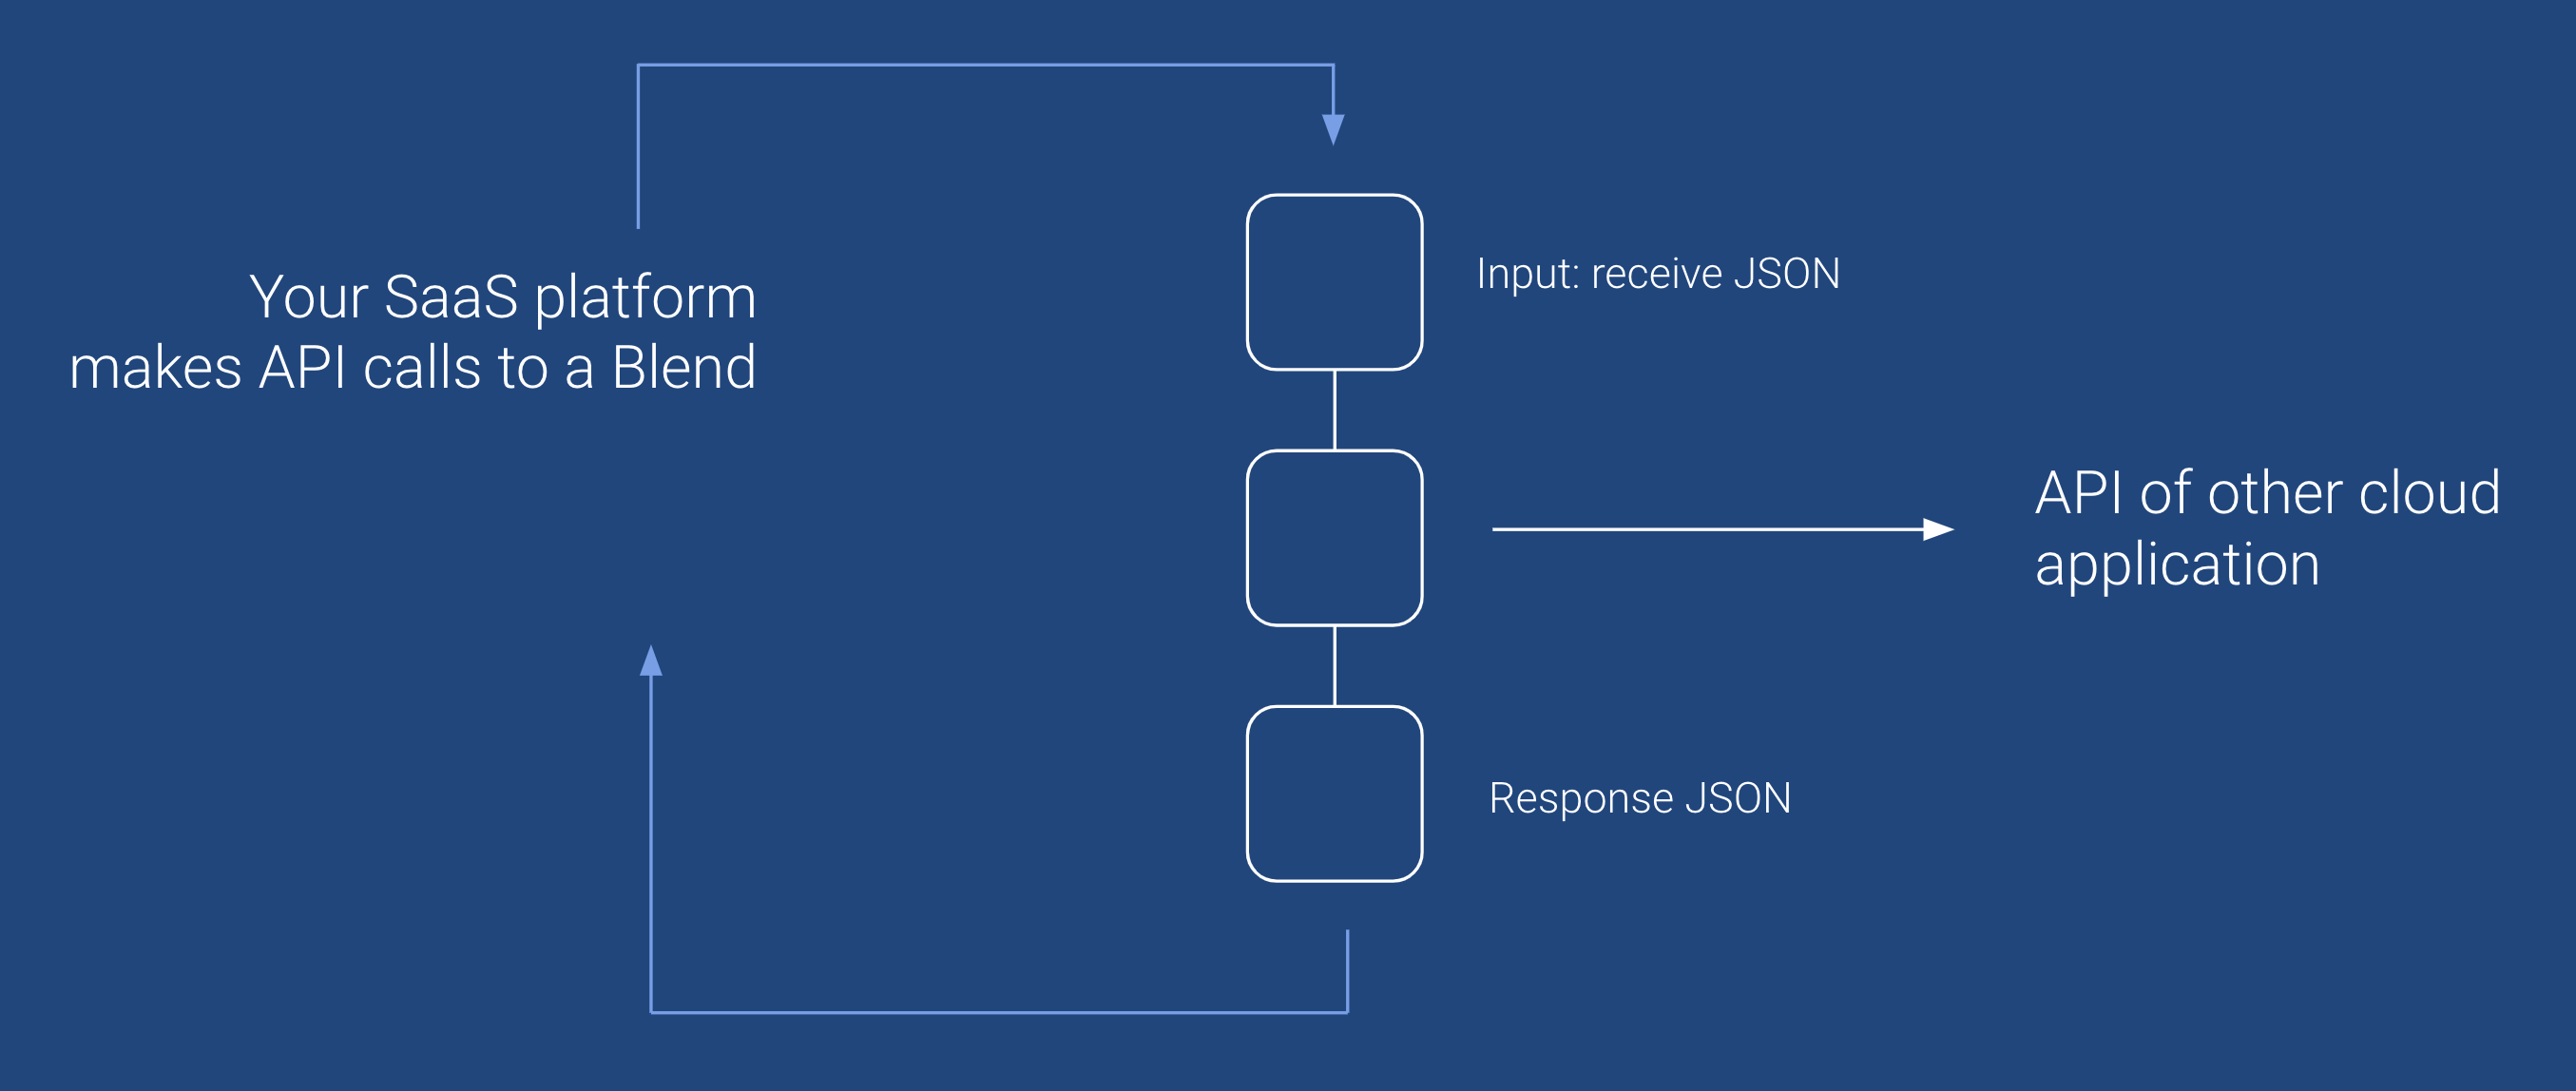 Your SaaS platform makes API calls to an automation. The automation receives an input JSON, connects to an API of another cloud application, and sends a response JSON back to you.